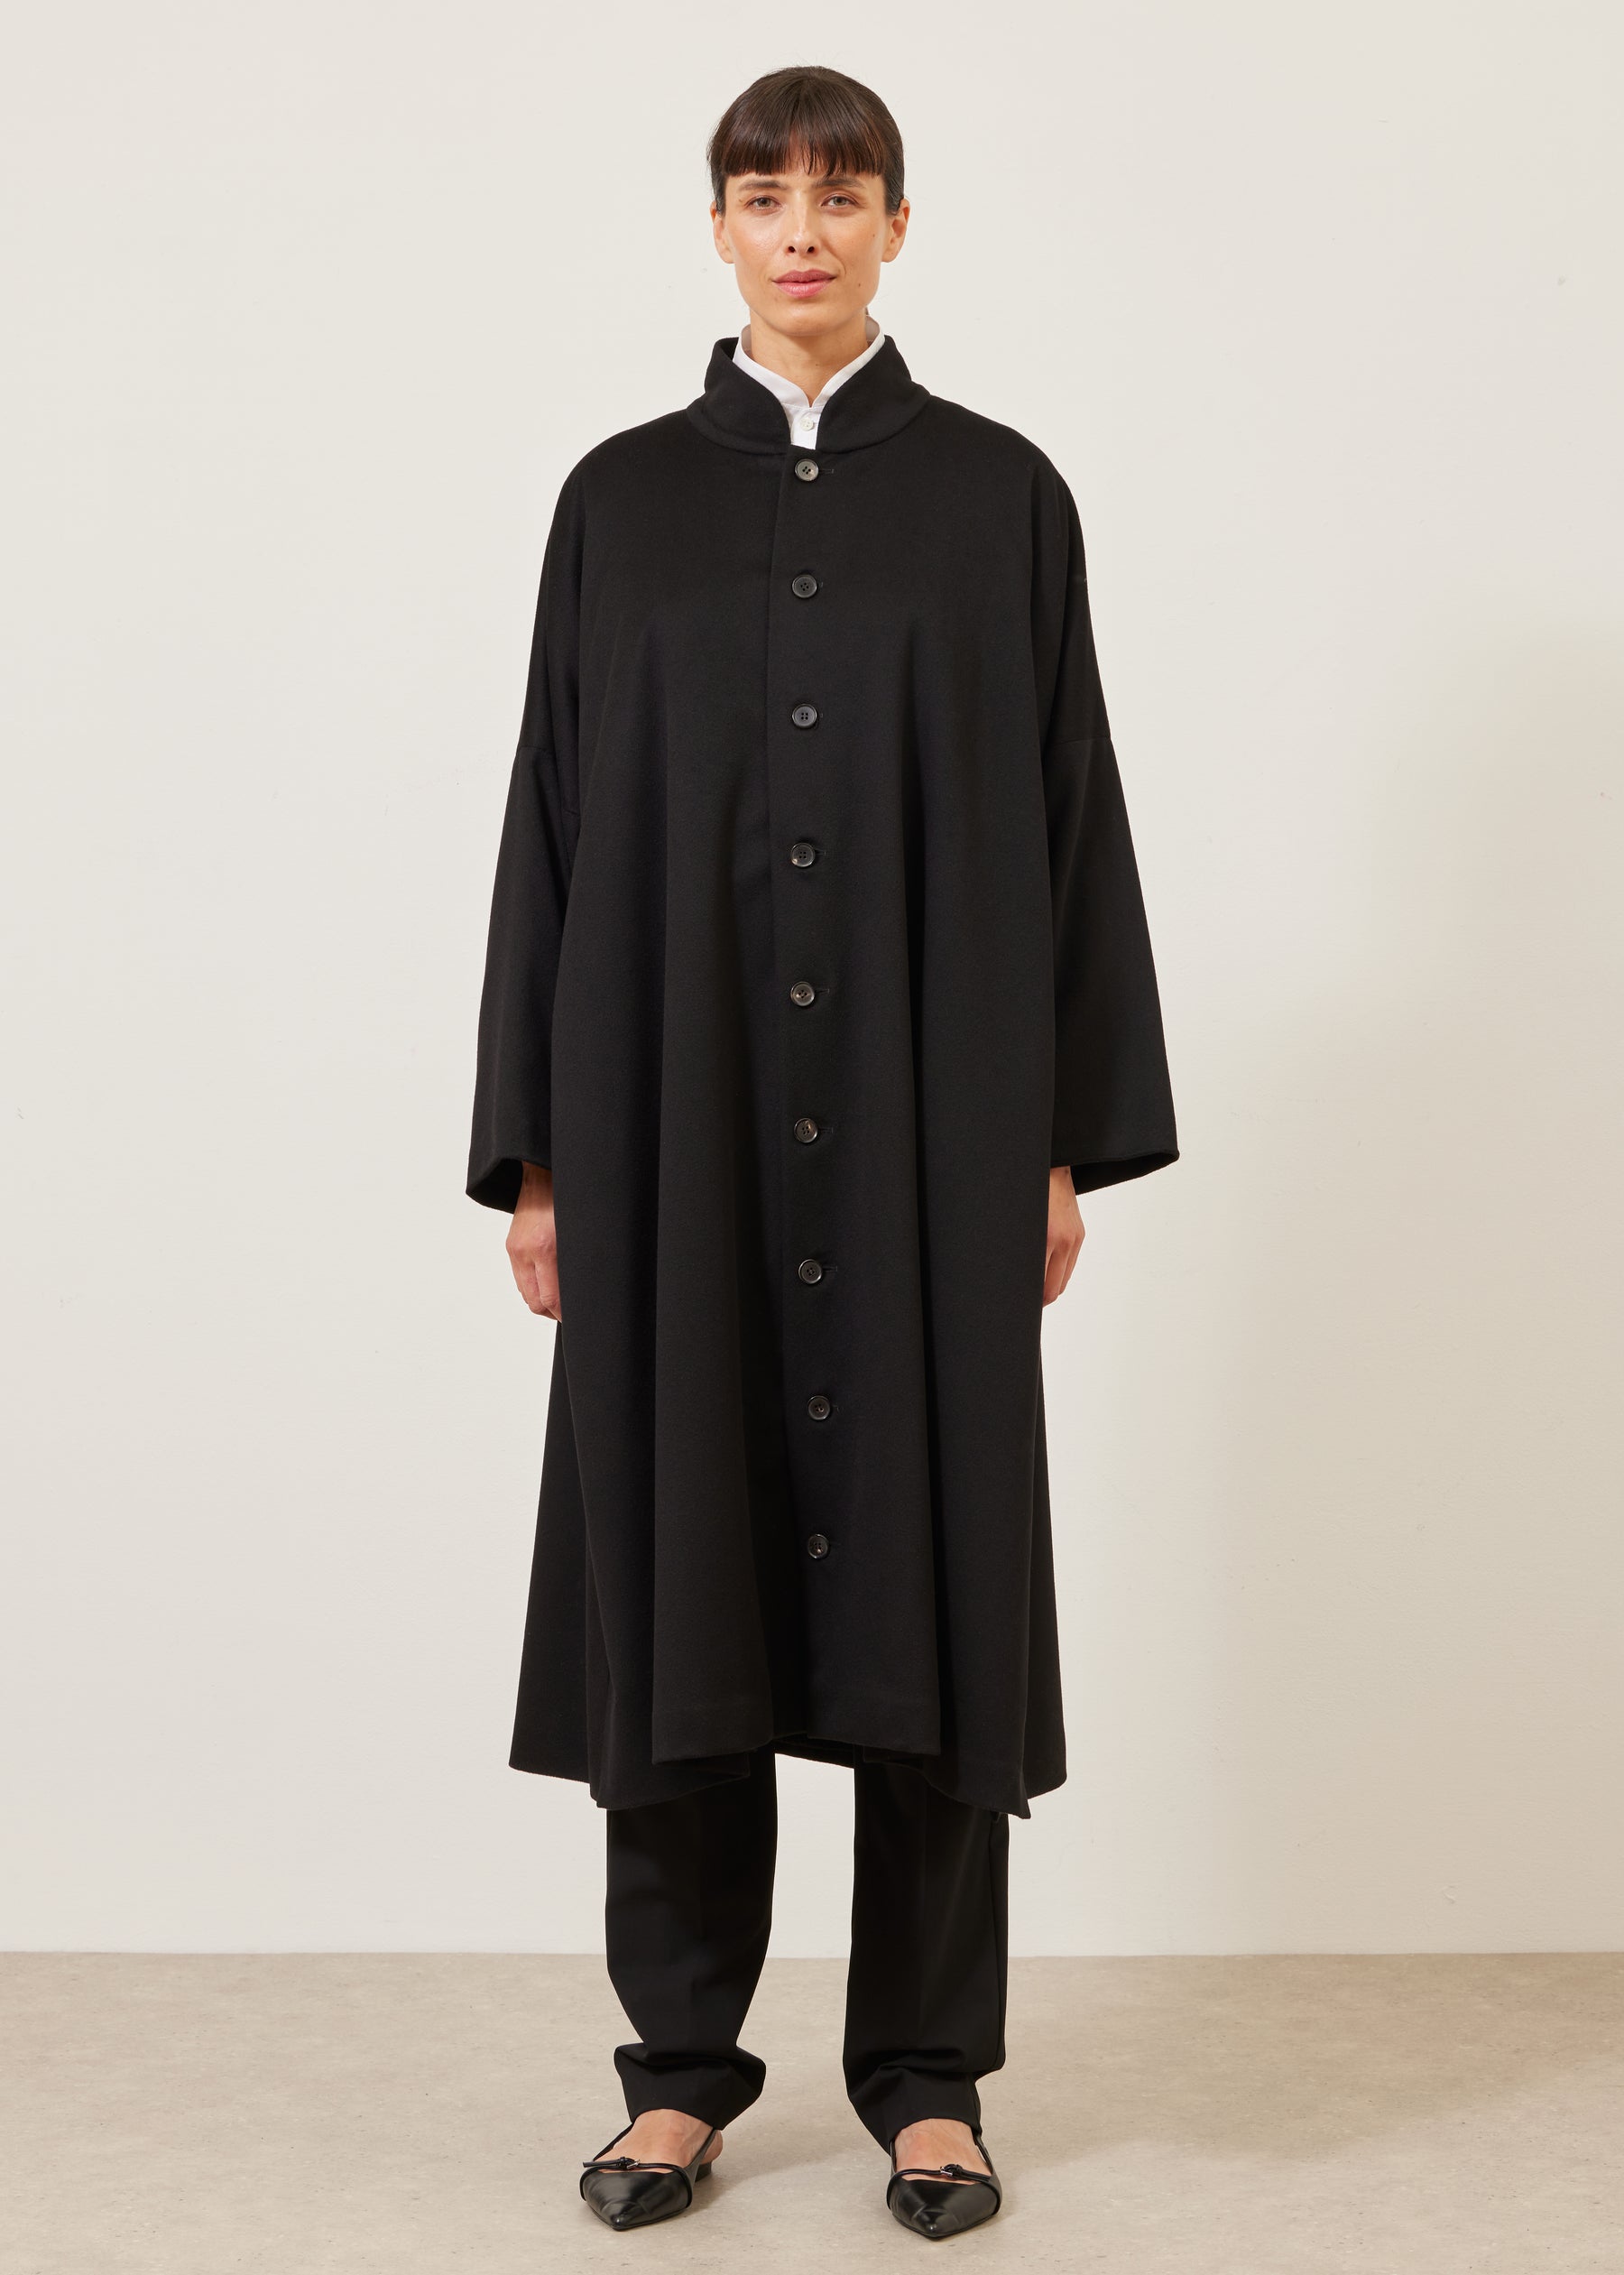 imperial coat with chinese collar - full length